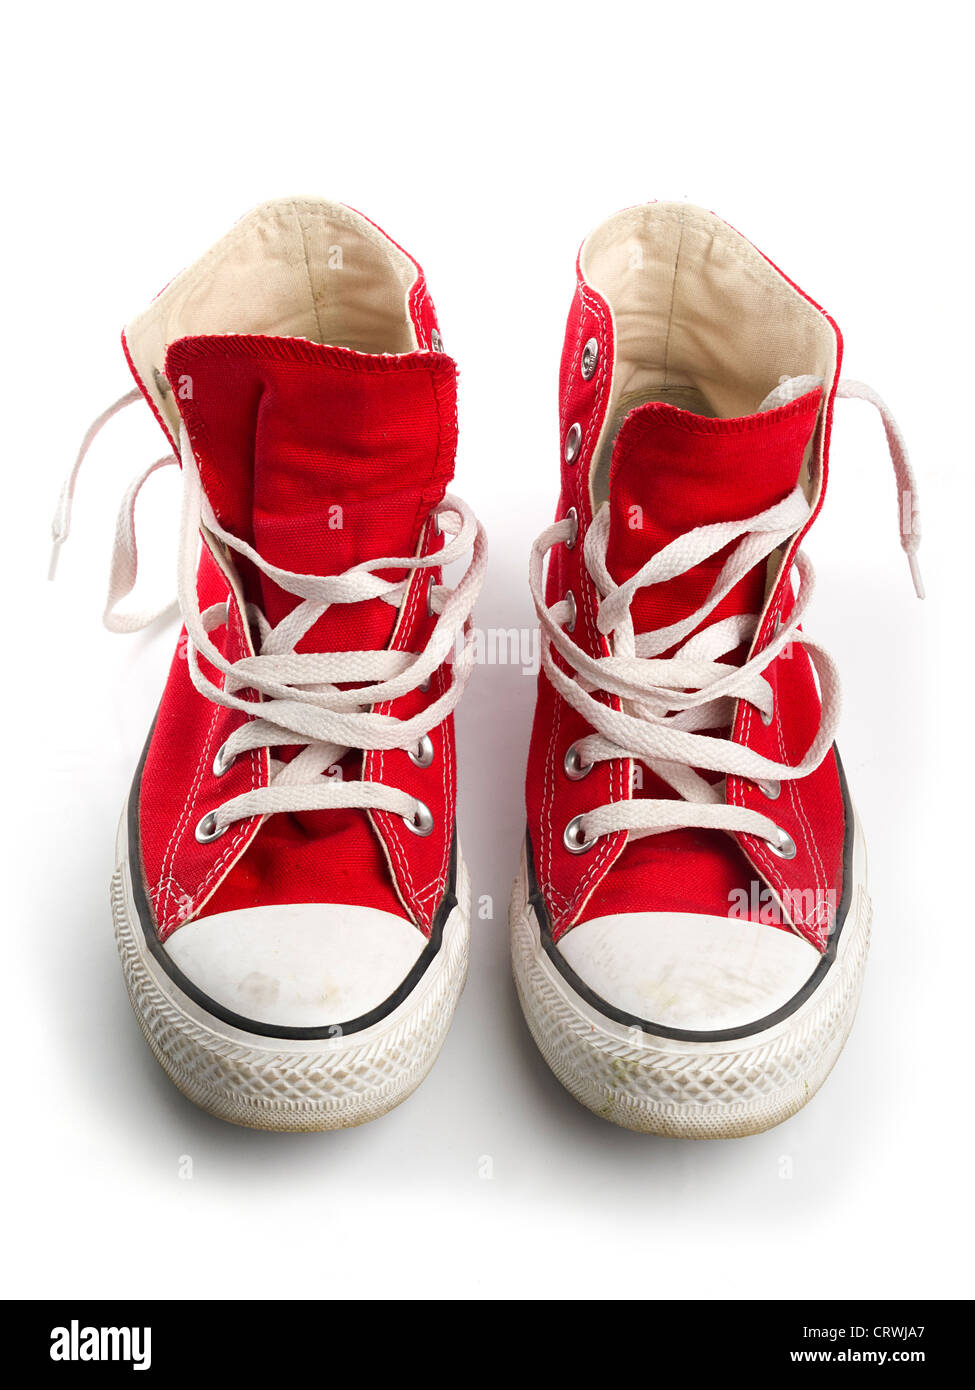 red converse style shoes